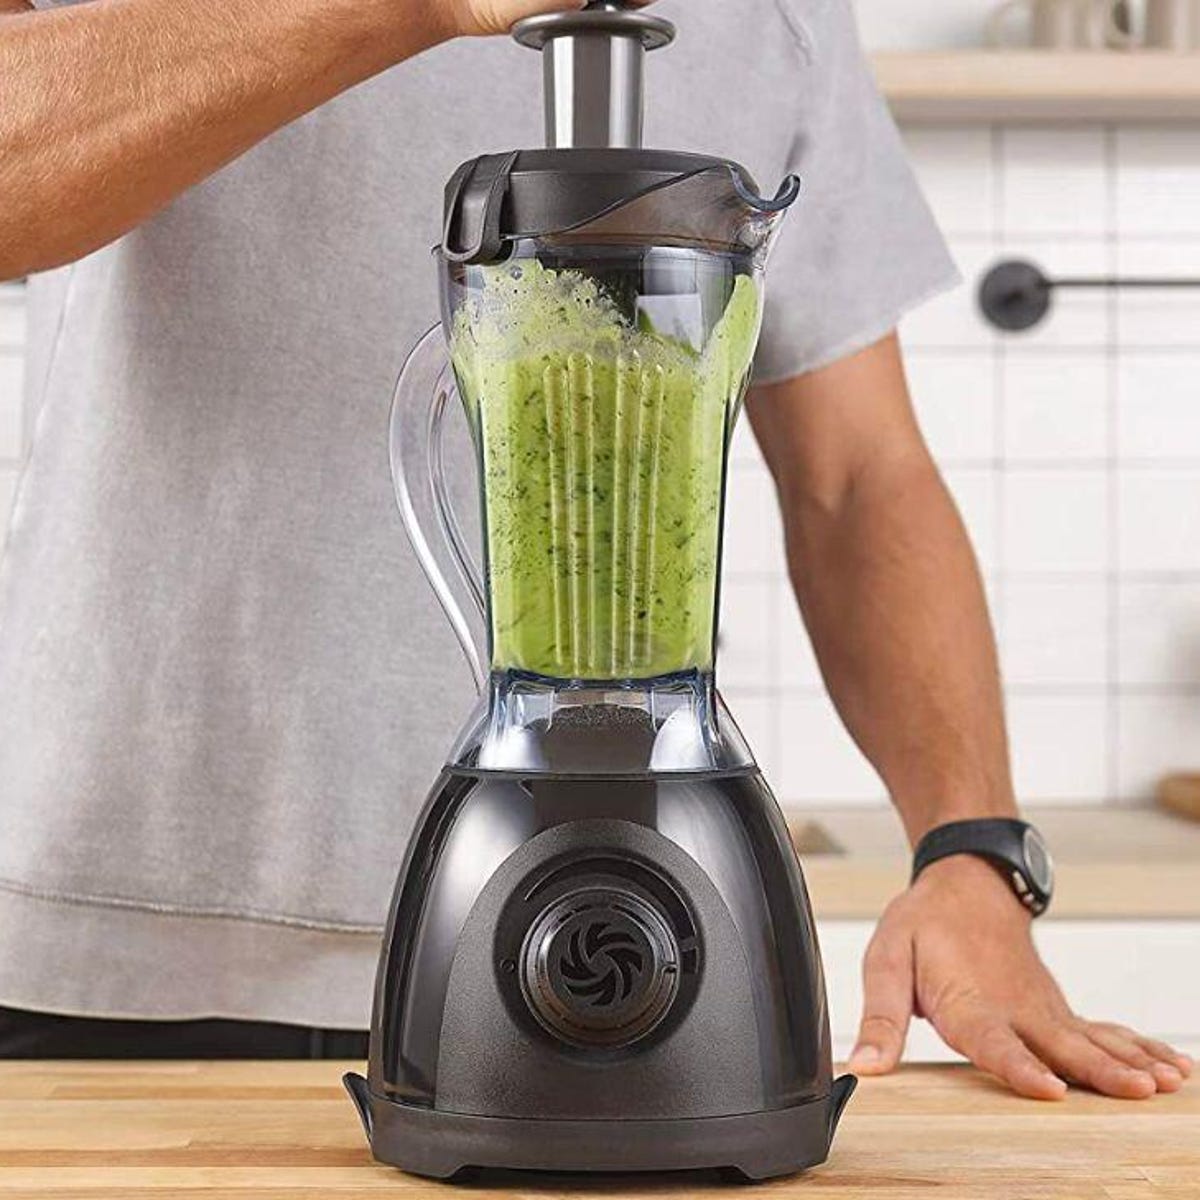 This Vitamix blender is $75 off during Prime Day (Update: Expired)